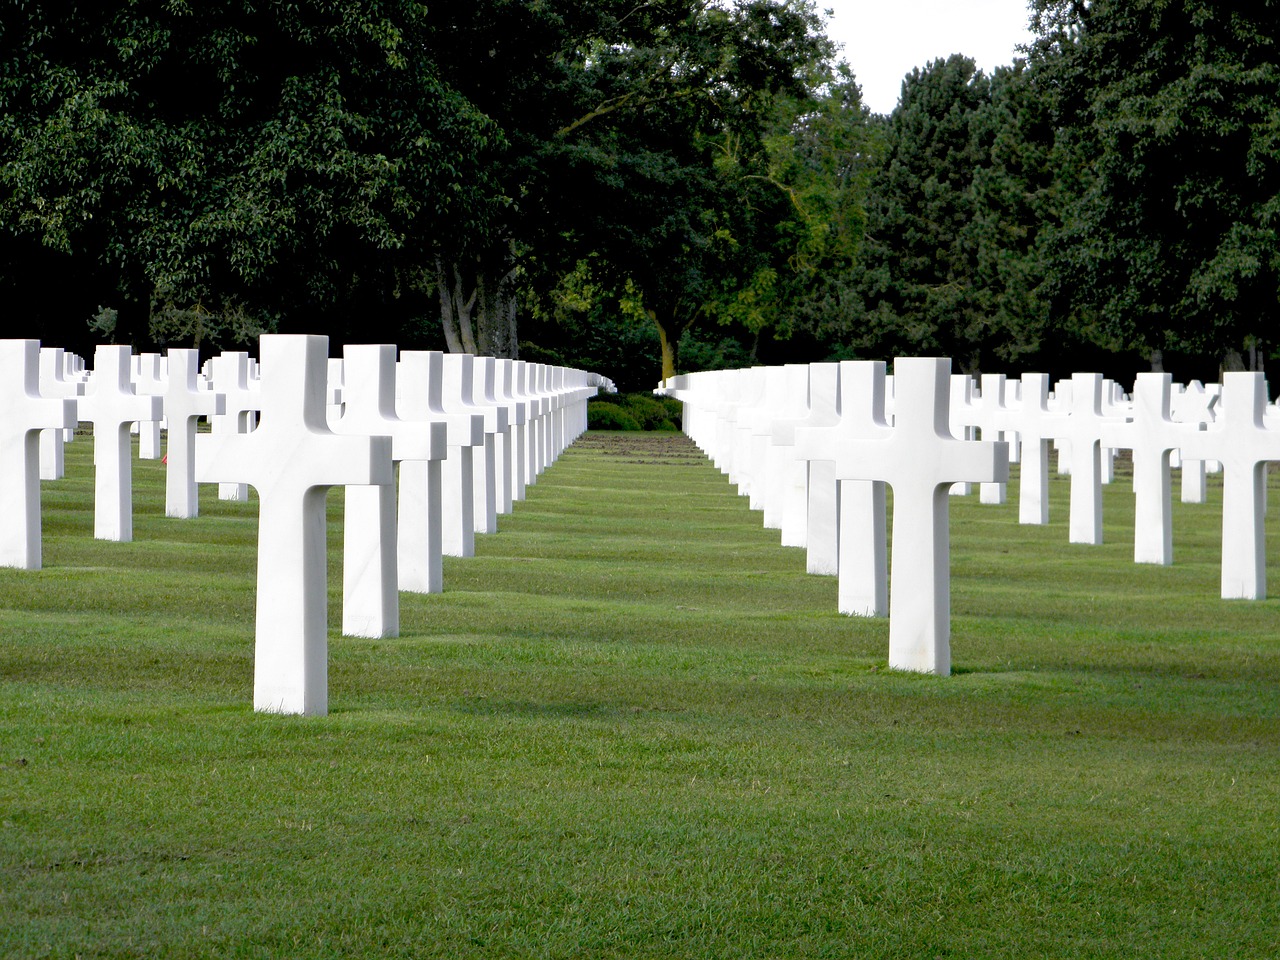 a field of white crosses with trees in the background, by Robert Jacobsen, flickr, d-day, usa-sep 20, memphis, minimalist